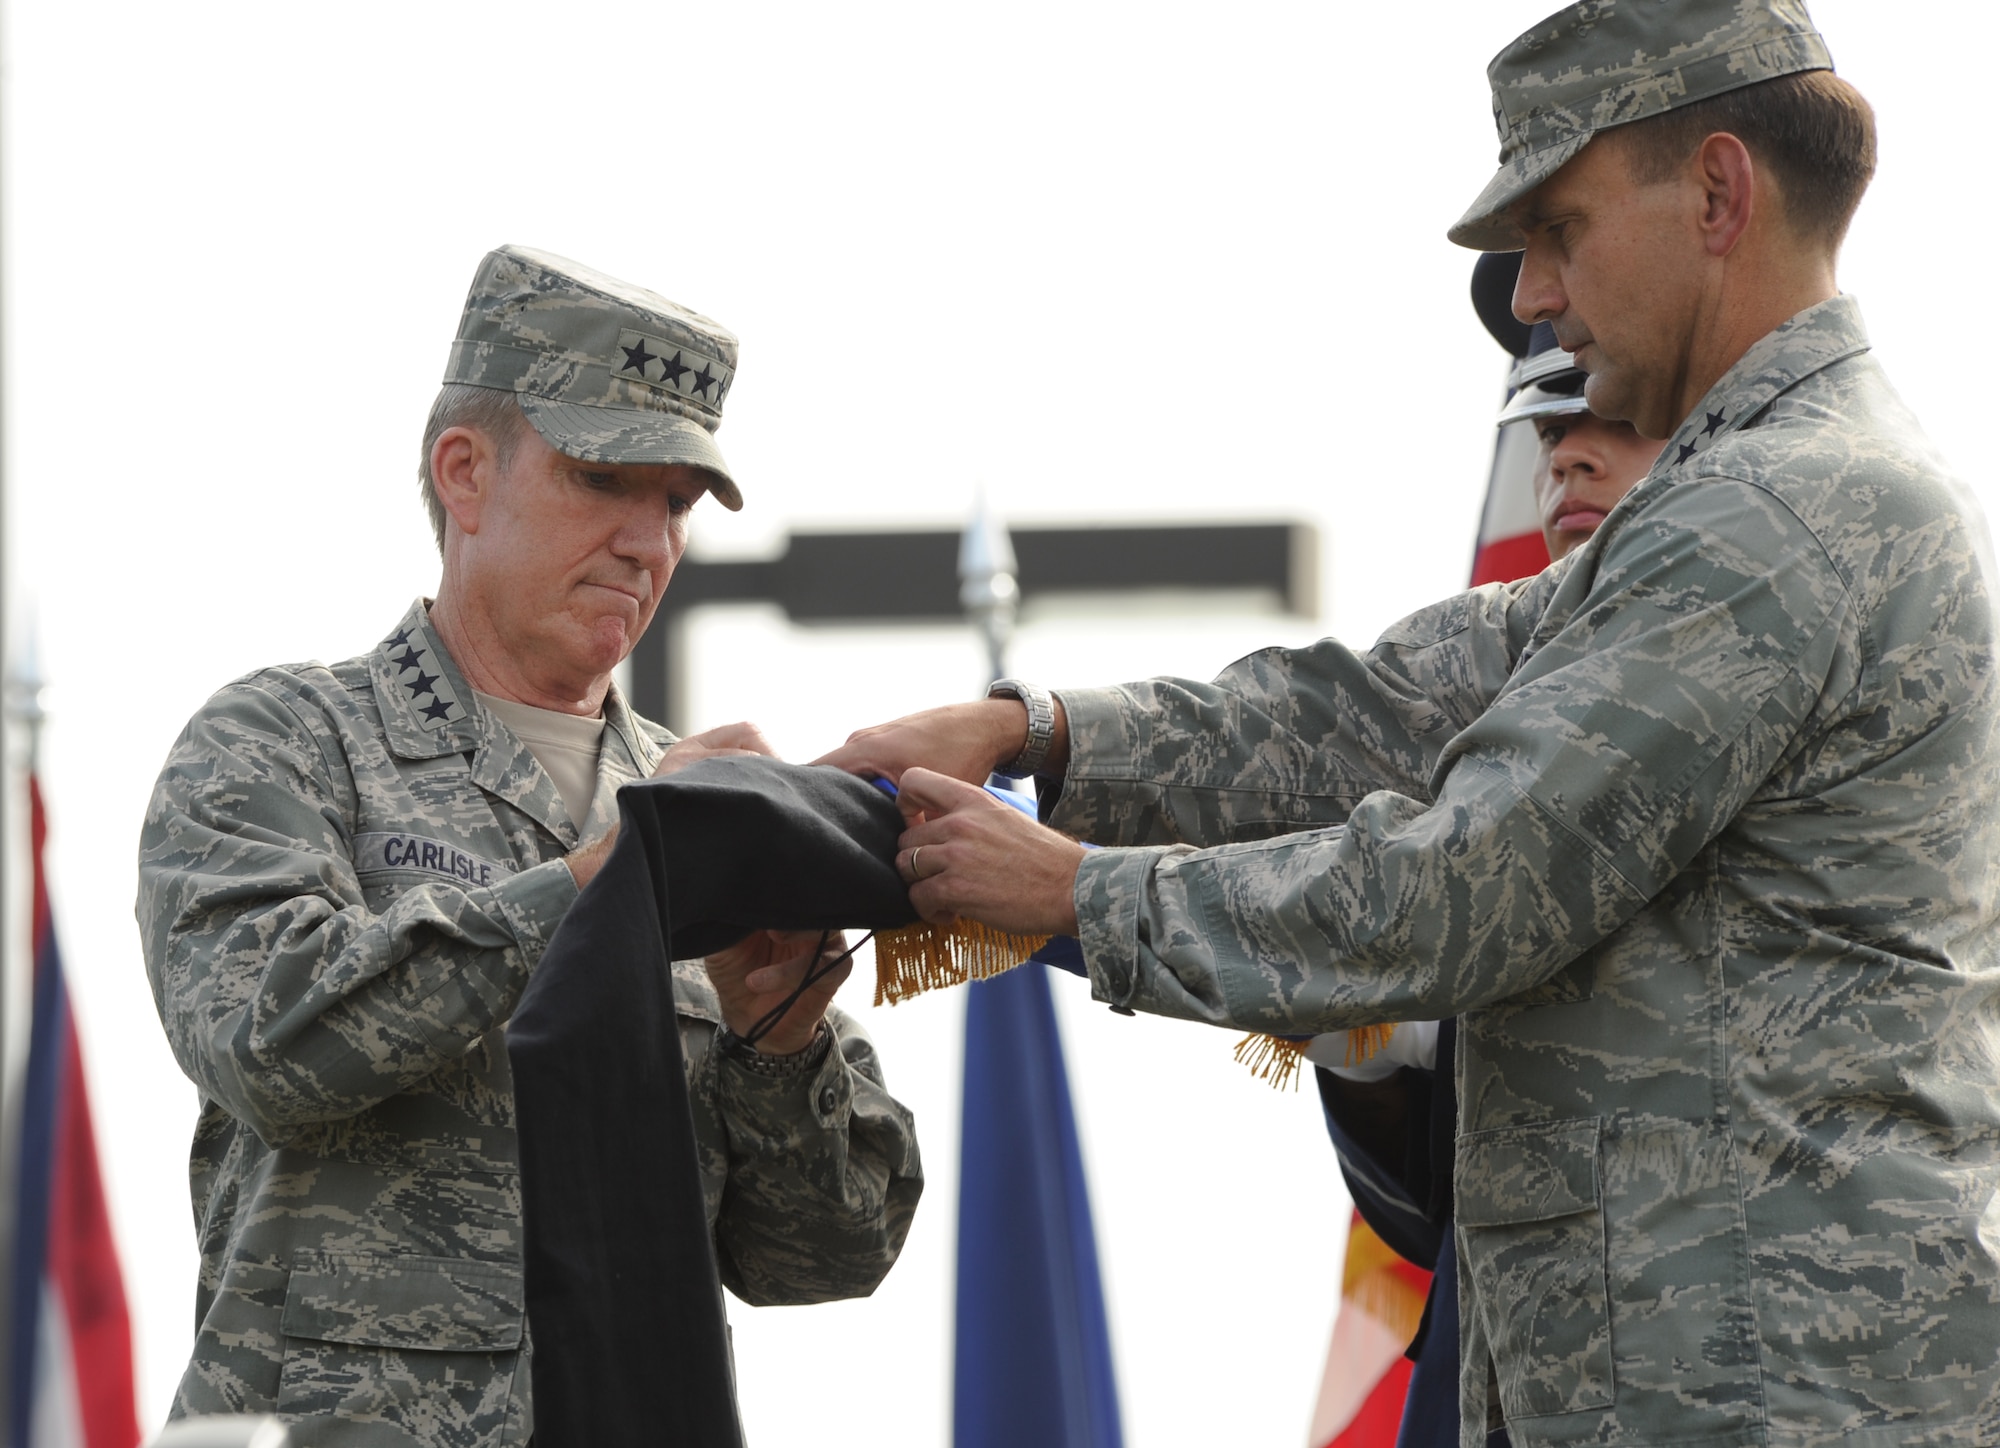 Gen. Herbert J. "Hawk" Carlisle, Pacific Air Forces commander, encases the 13th Air Force flag with Lt. Gen. Stanley T. Kresge, former 13th Air Force commander, during the 13th Air Force inactivation ceremony Sept. 28, 2012, at Joint Base Pearl Harbor-Hickam, Hawaii. The 13th Air Force was inactivated and combined with the staff of Pacific Air Forces at Joint Base Pearl Harbor-Hickam, Hawaii. (U.S. Air Force photo/Tech. Sgt. Matthew McGovern)